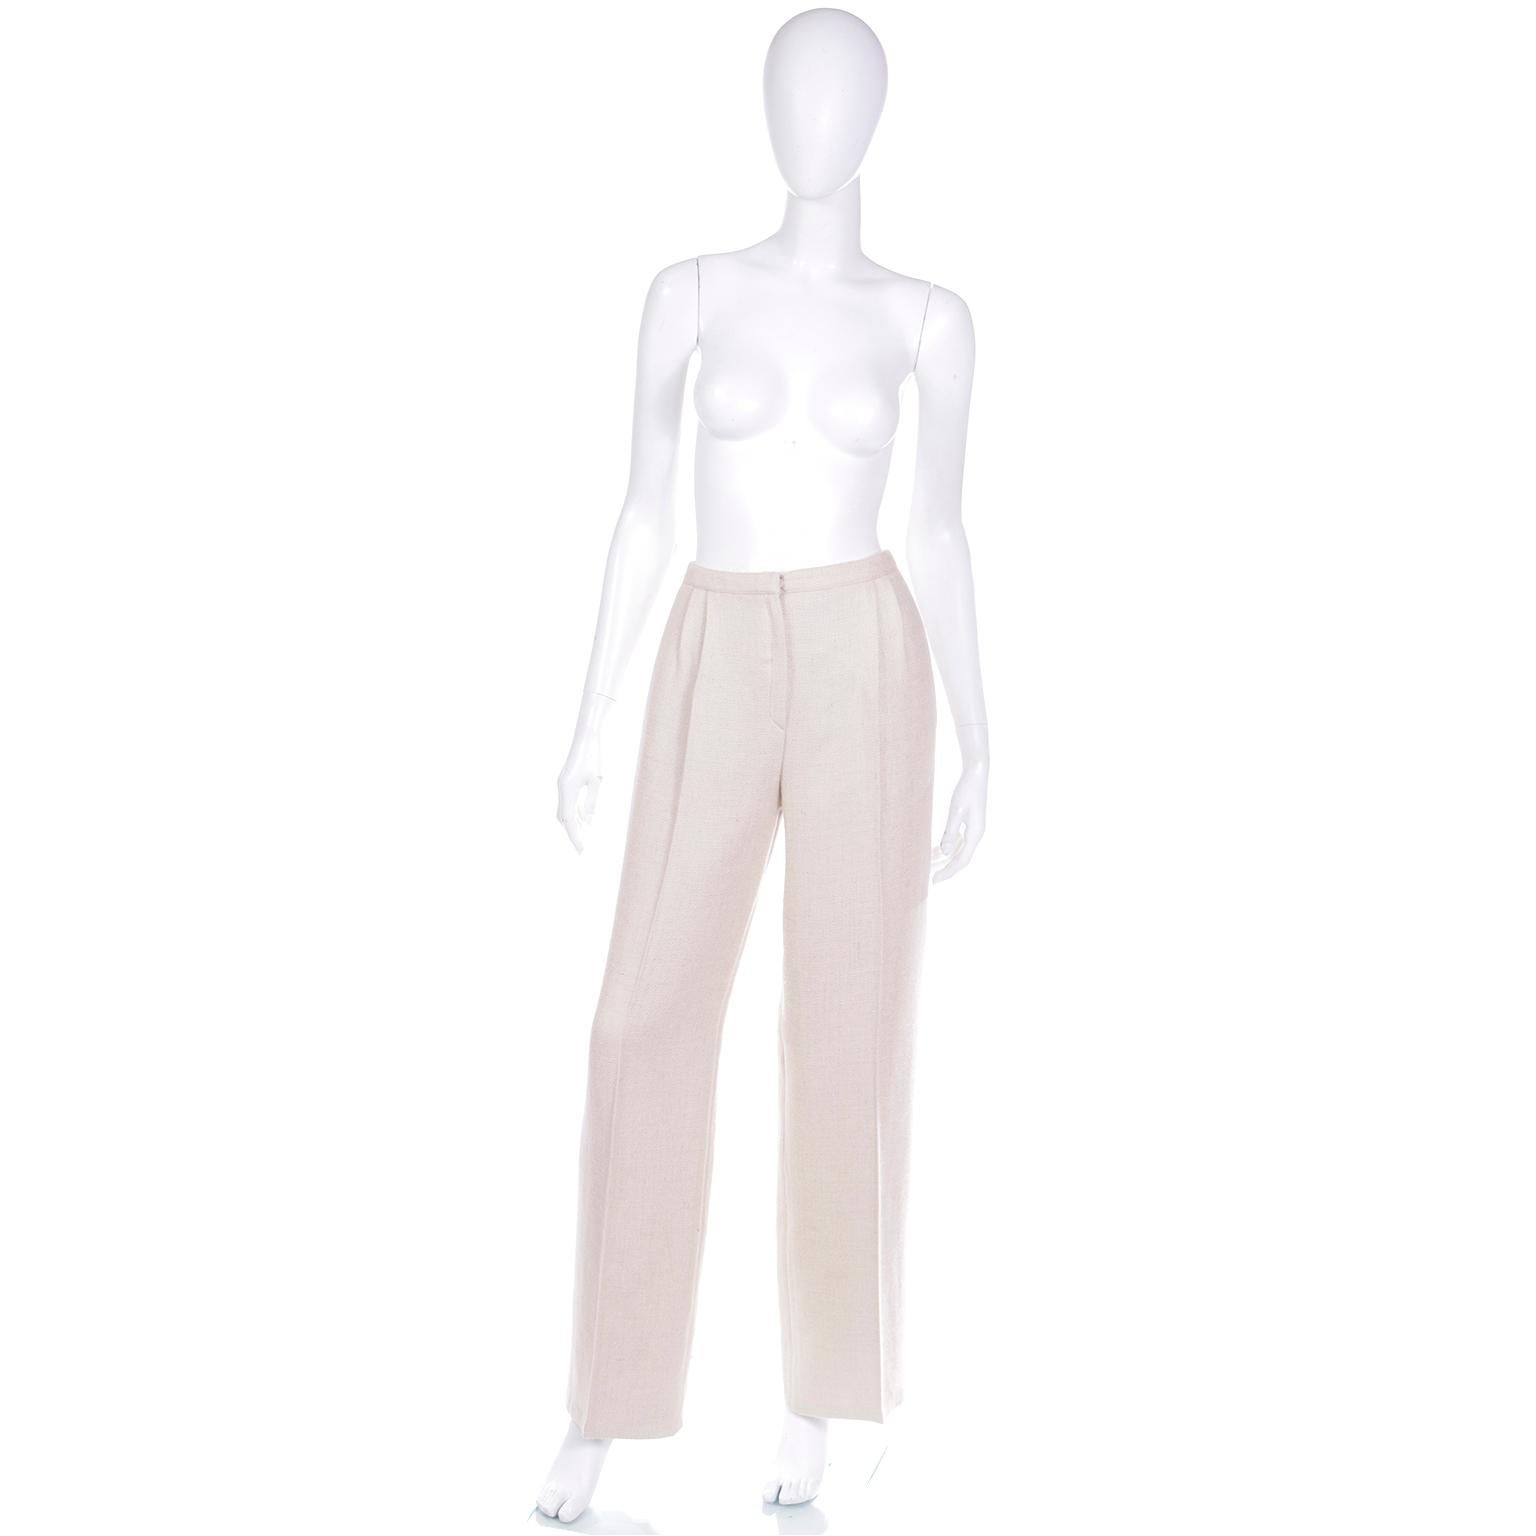 These Valentino early 2000's natural woven high waisted trousers are in a luxe blend of silk, linen and wool, creating a beautiful basket weave texture and feel. The high waisted pants are ultra sophisticated and they are in a natural, neutral tone